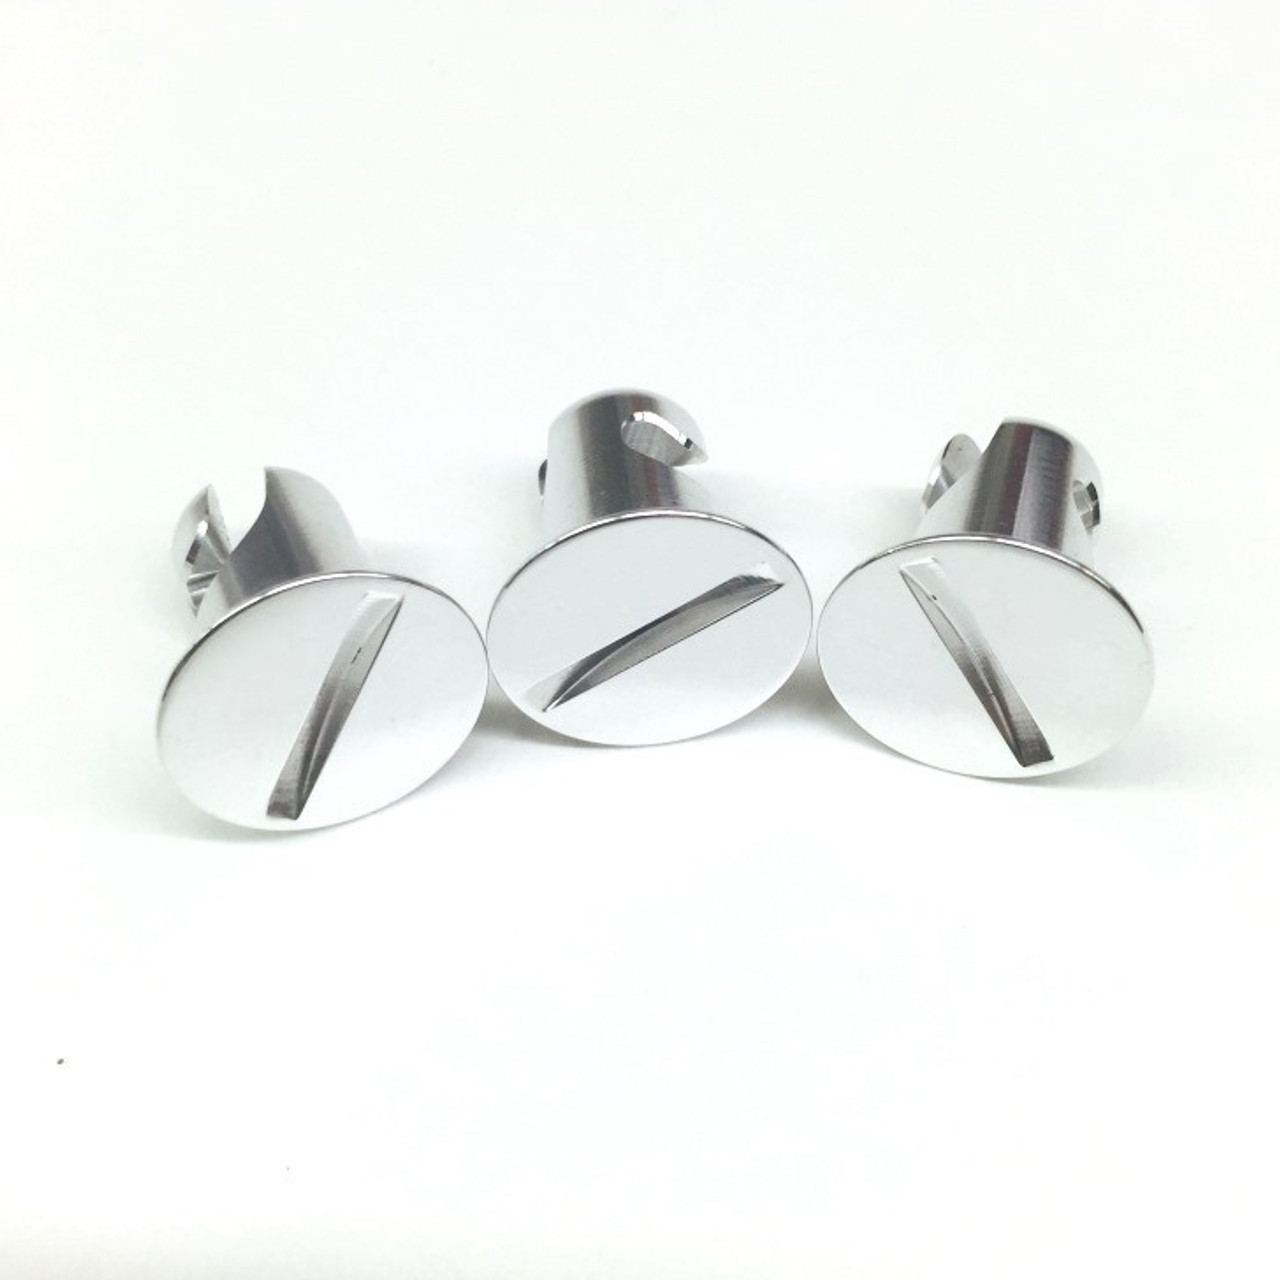 .550 long polished slotted flat head quarter turn DZUS button fasteners